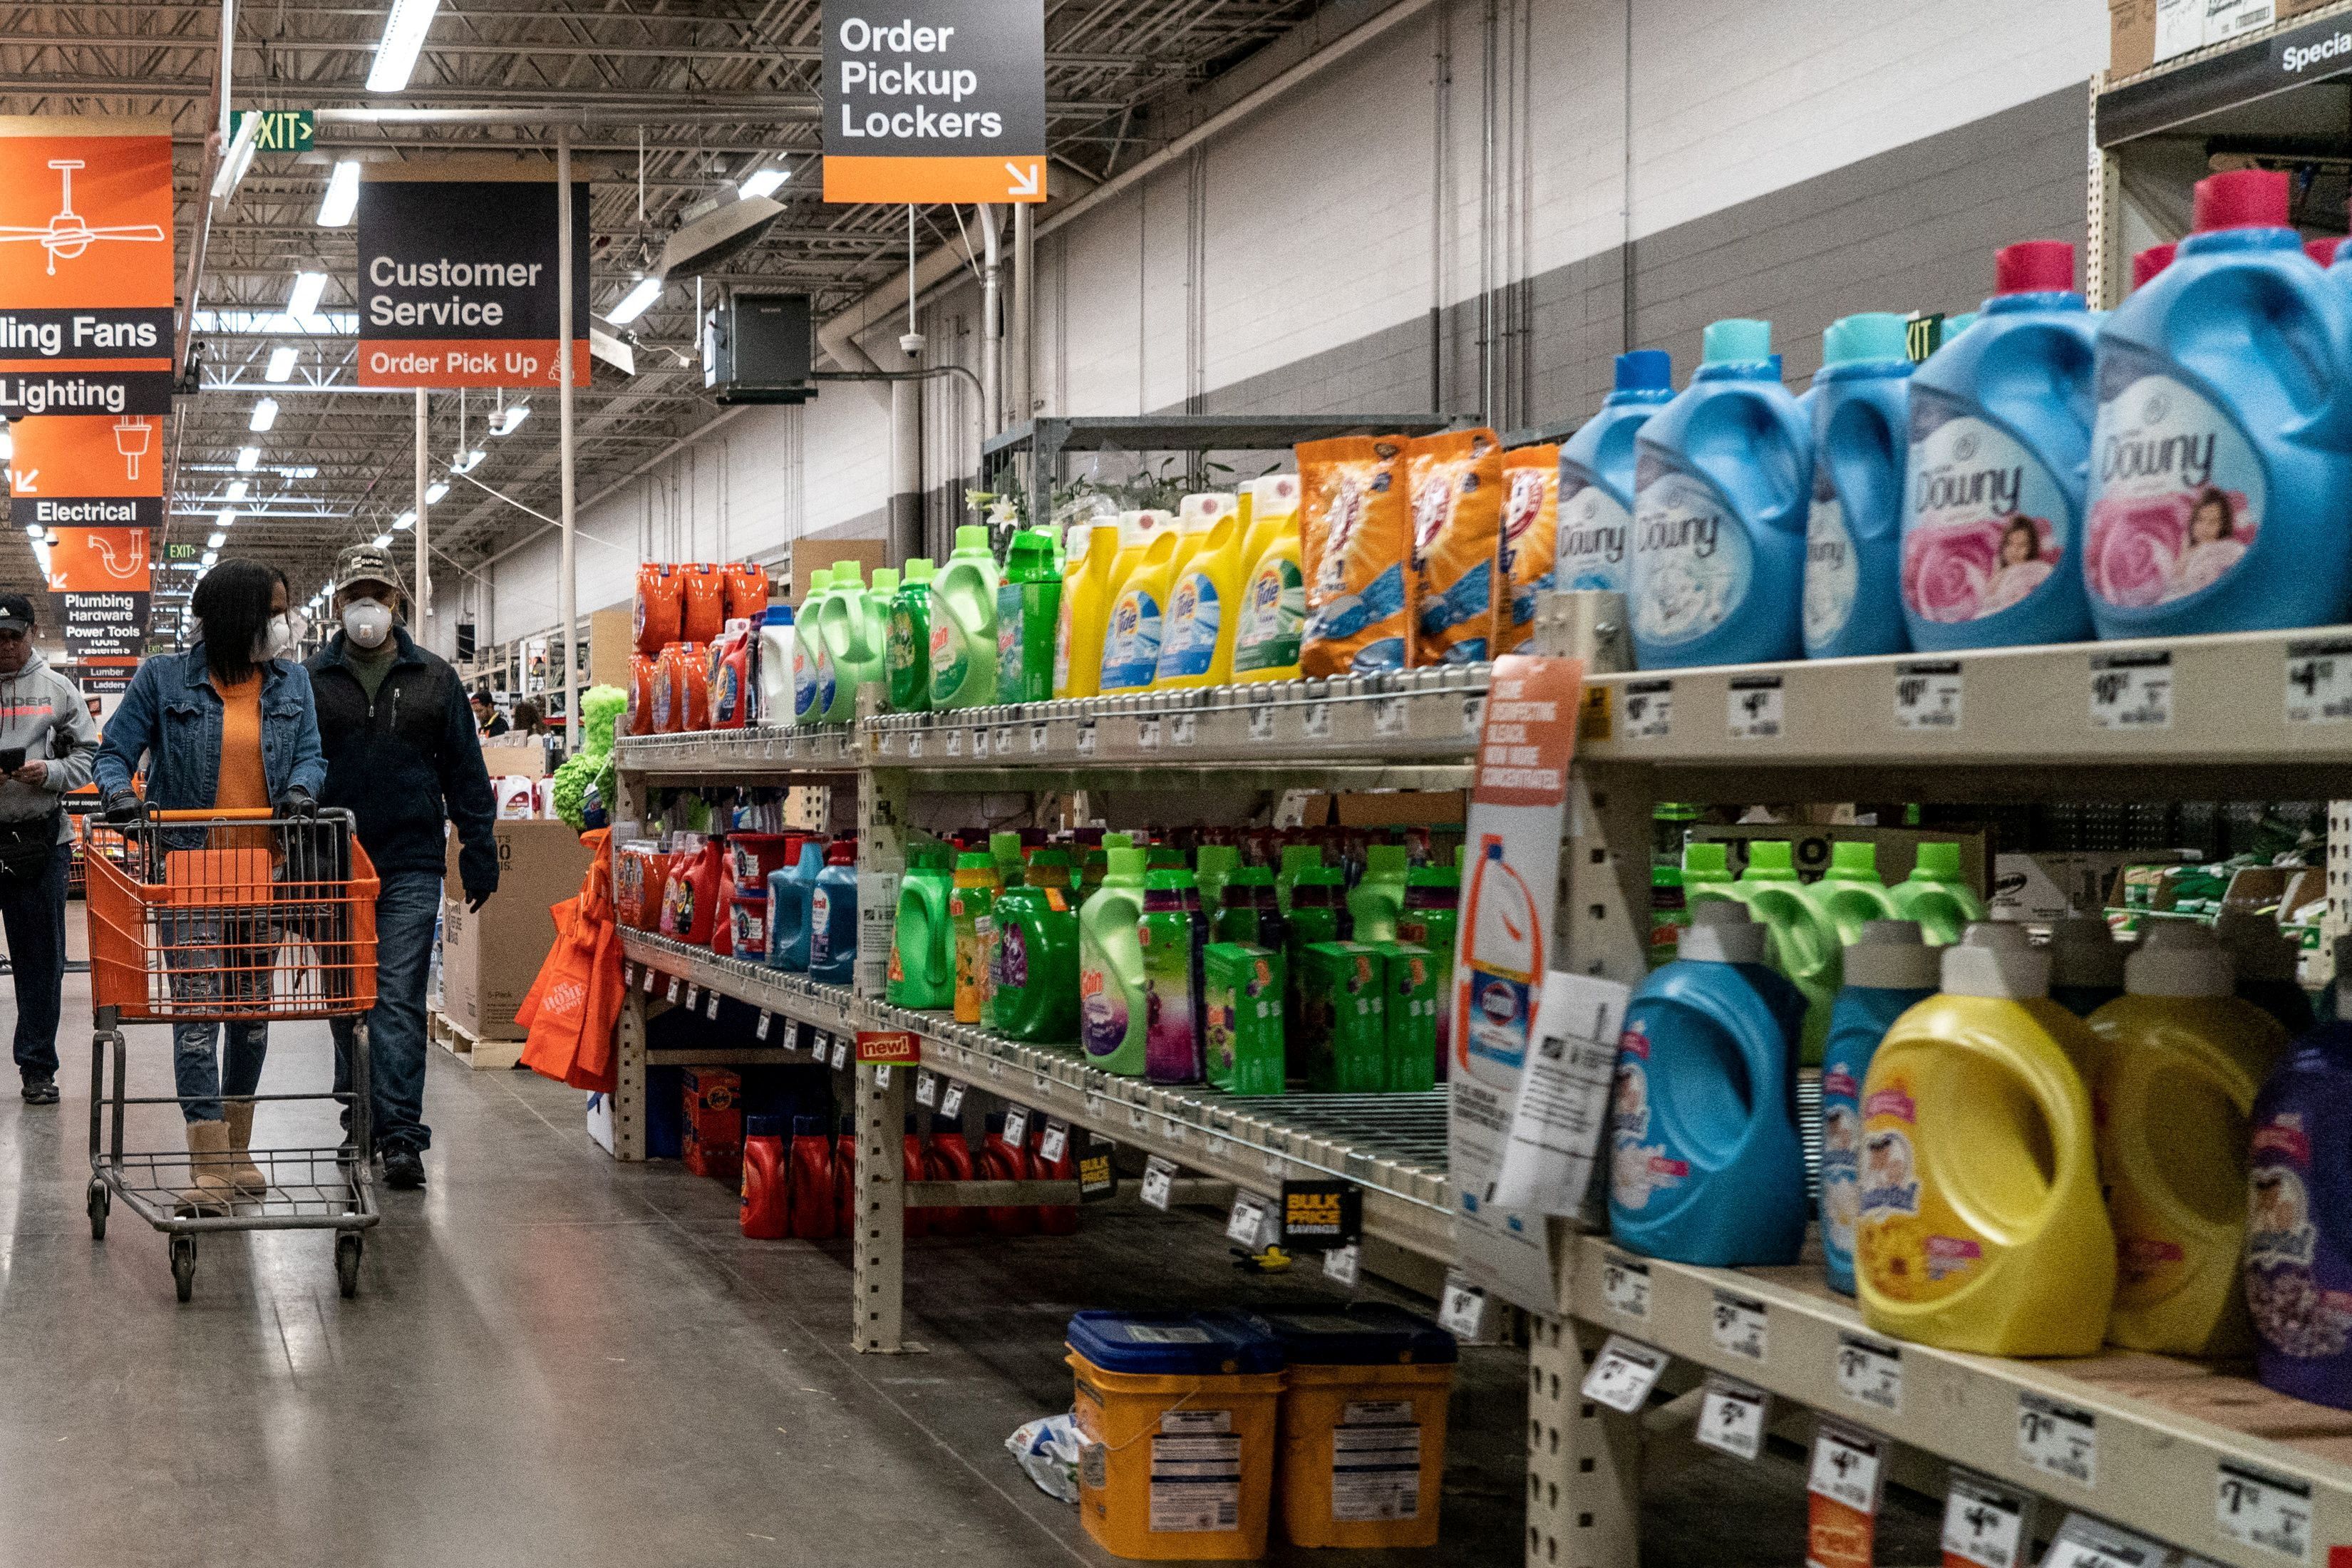 Shoppers browse in a Home Depot building supplies store while wearing masks to help slow the spread of coronavirus disease (COVID-19) in north St. Louis, Missouri, U.S. April 4, 2020. Picture taken April 4, 2020.  REUTERS/Lawrence Bryant/File Photo/File Photo